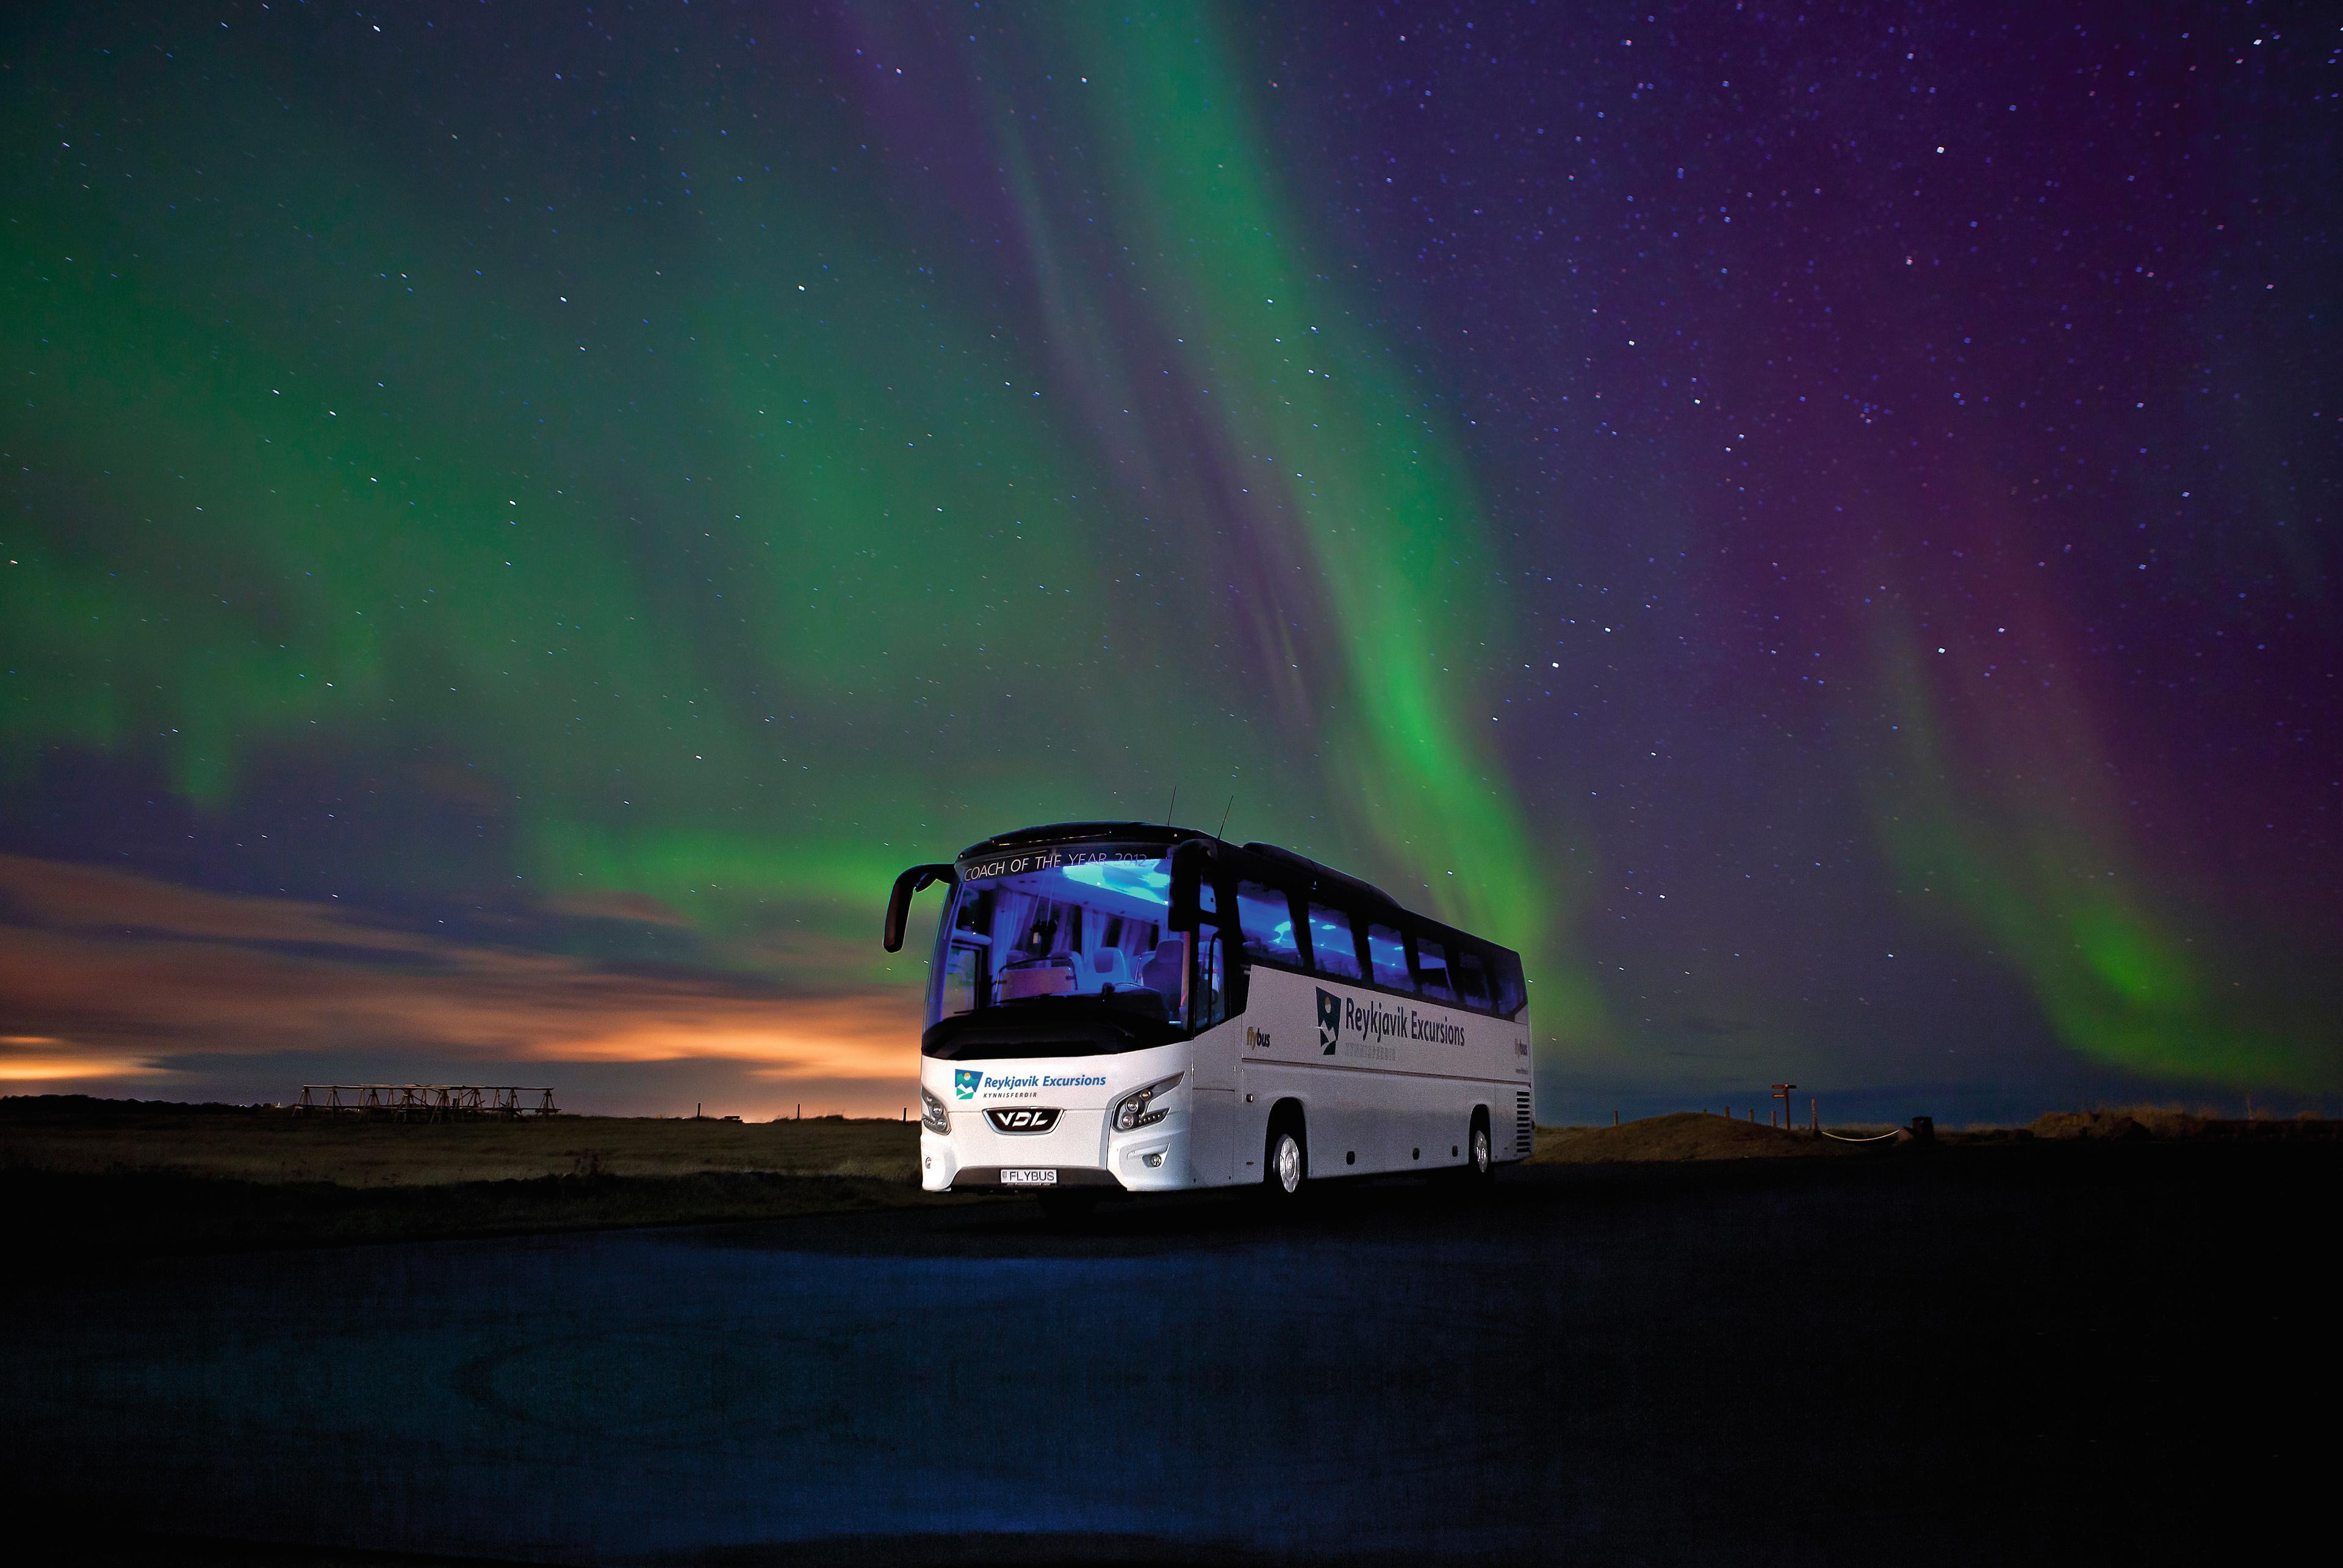 Reykjavik Excursions bus and dancing northern lights on the background.